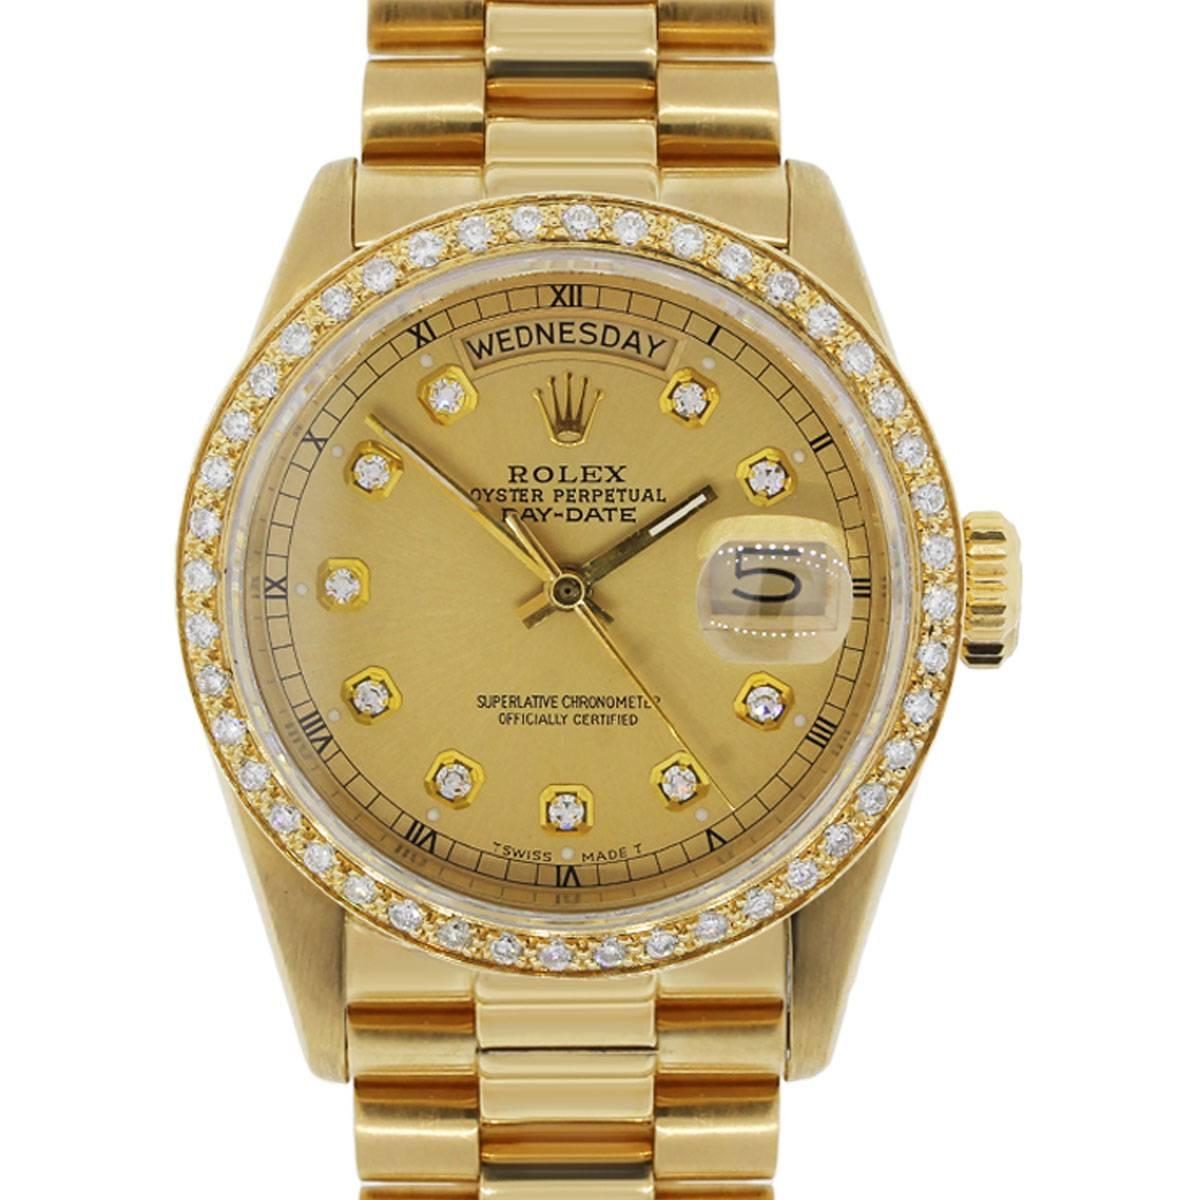 Rolex Yellow Gold Diamond Dial Presidential Day-Date Automatic Wristwatch